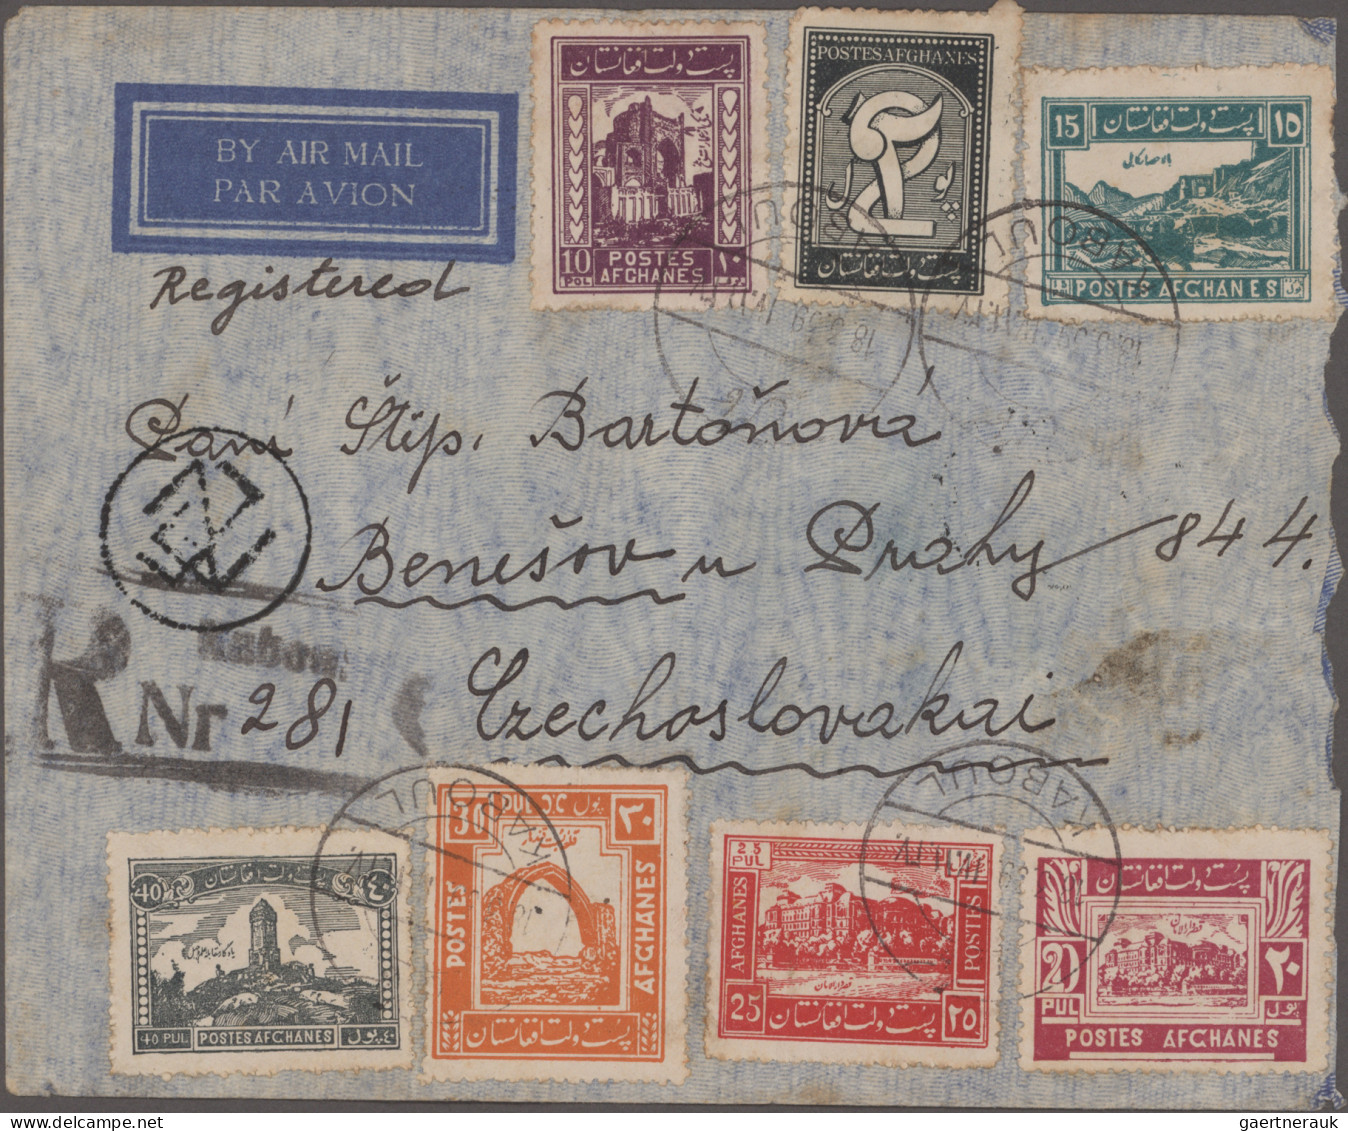 Afghanistan: 1927/1956 AIR MAIL: 18 interesting covers, postcards, picture postc